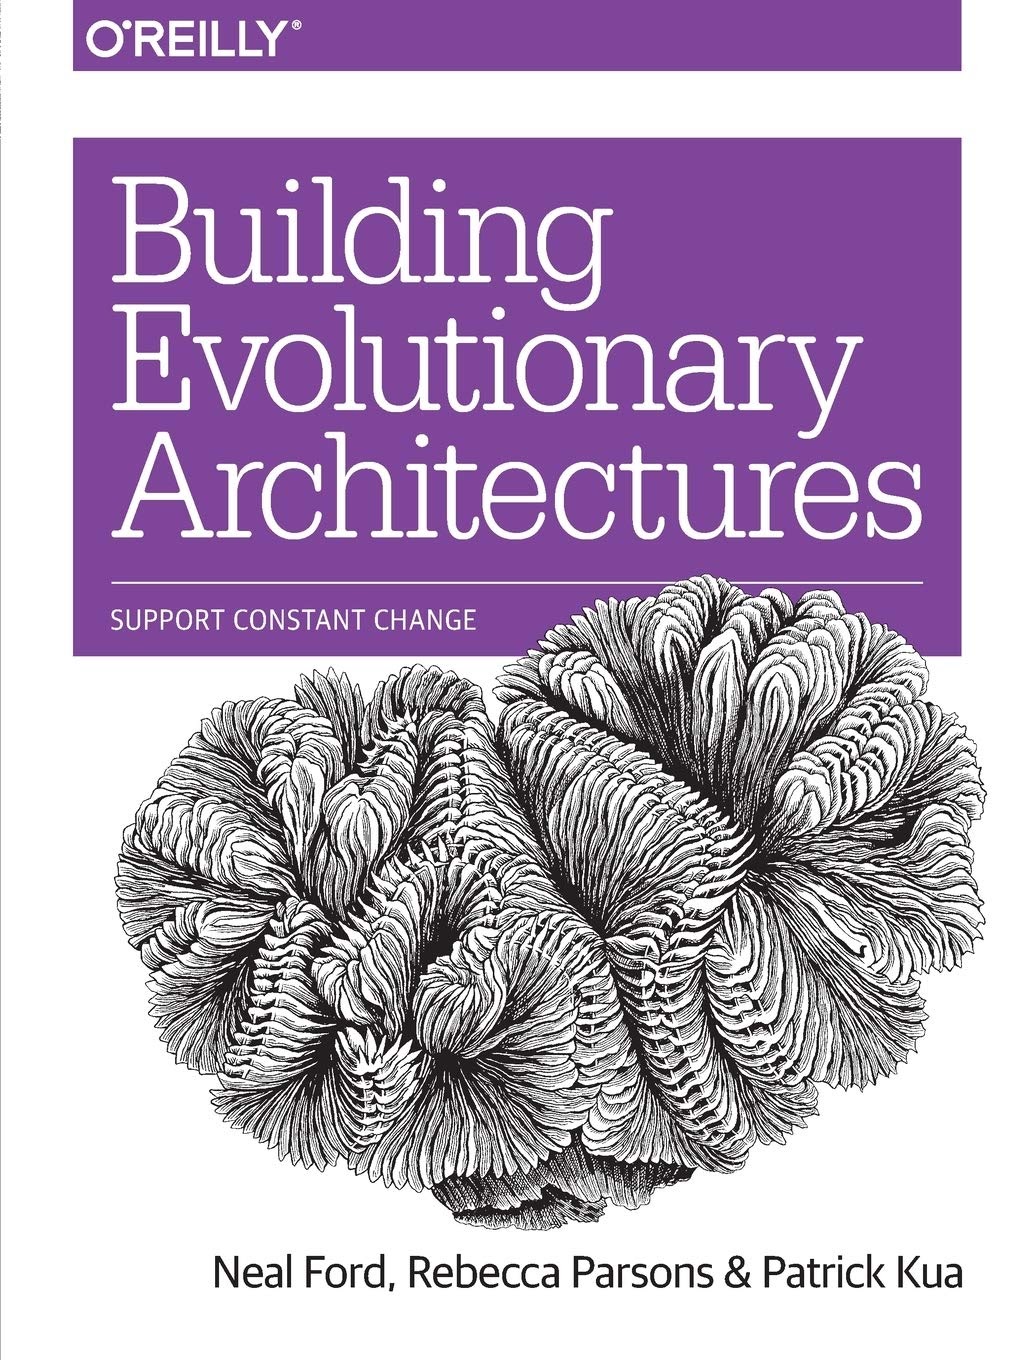 Building Evolutionary Architectures book cover